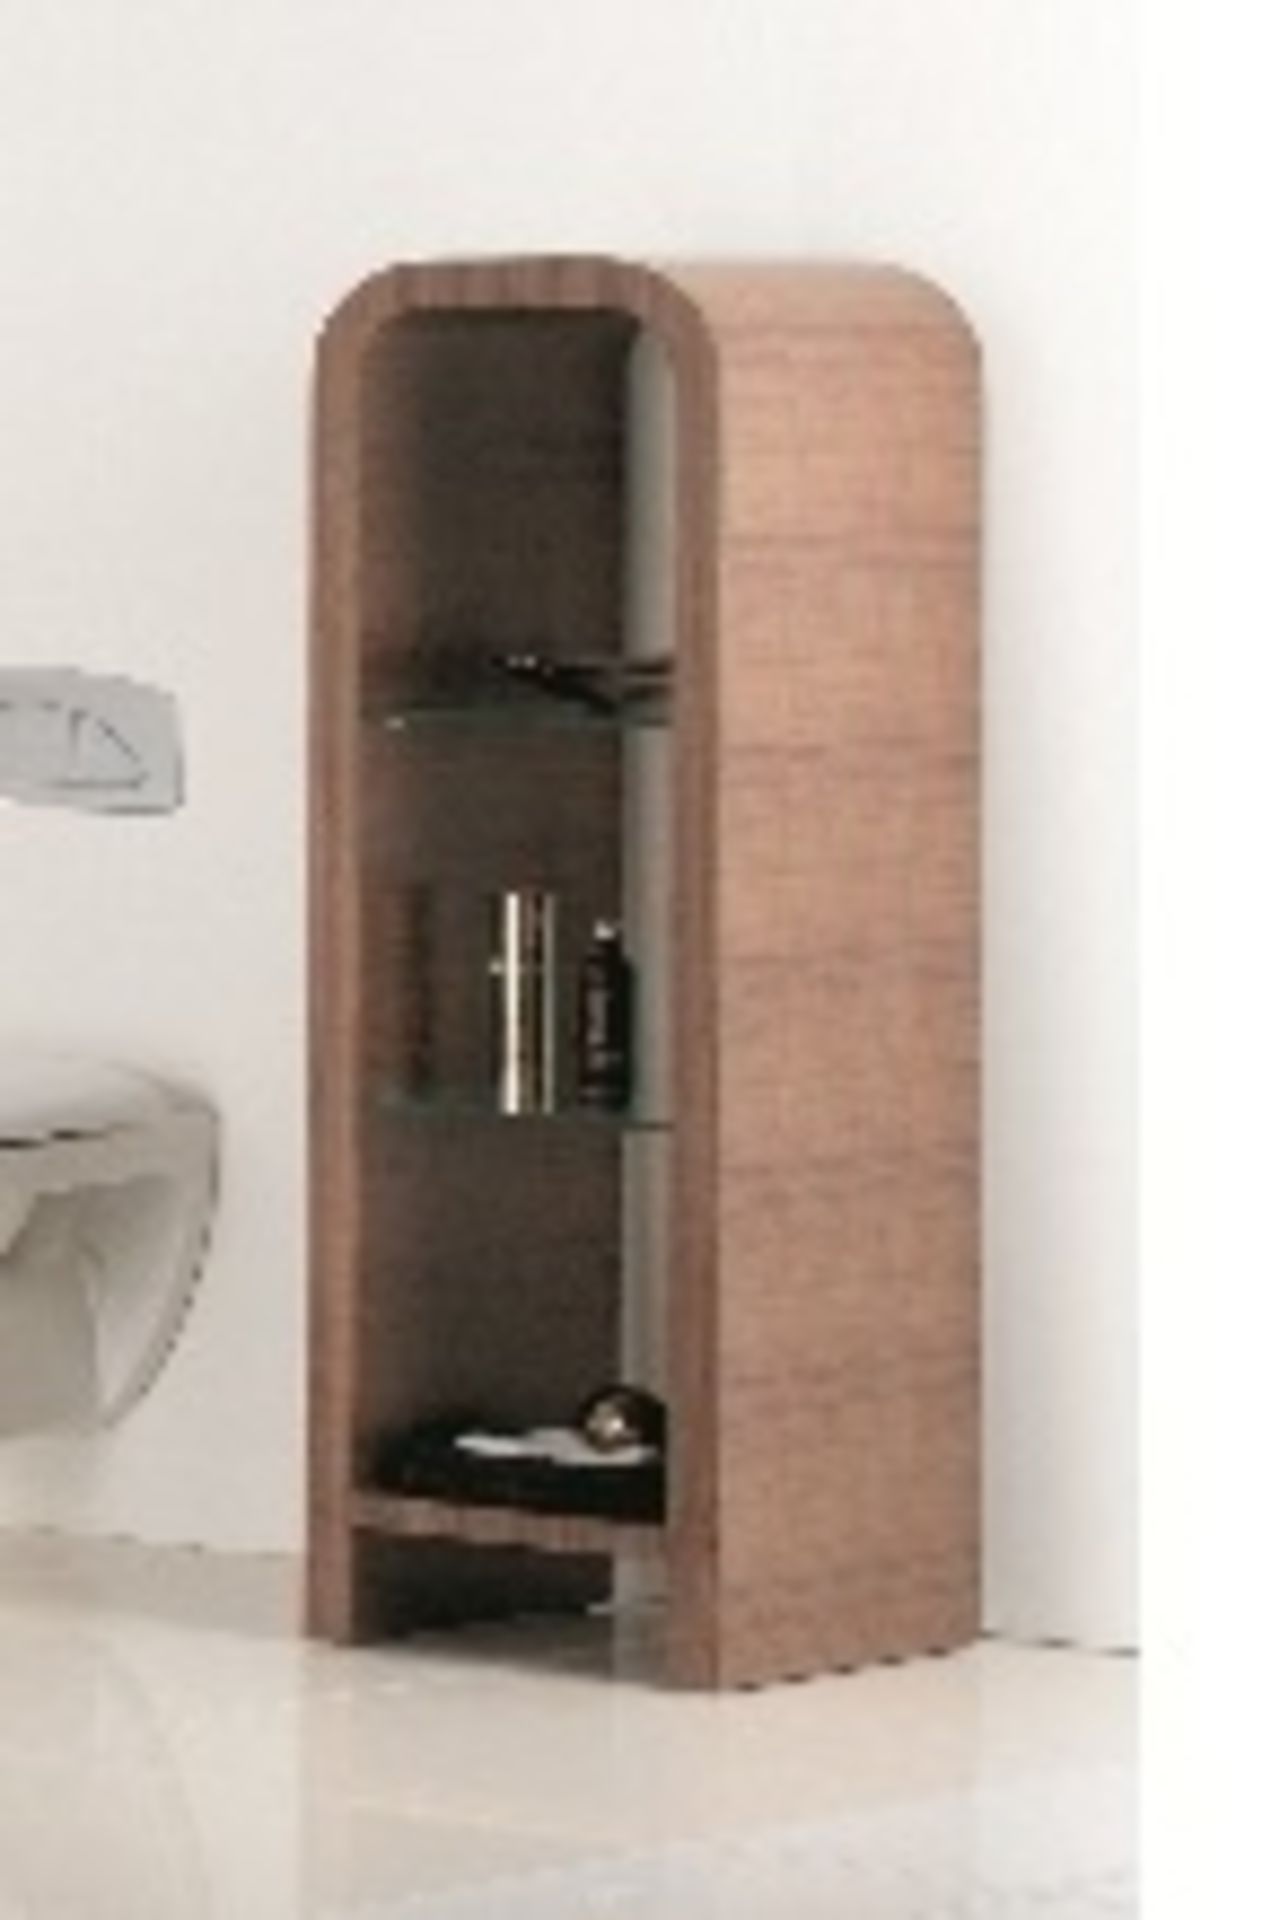 1 x Vogue ARC Bathroom Shelving Unit - WALNUT - Type Series 1 1400mm - Manufactured to the Highest - Image 2 of 2